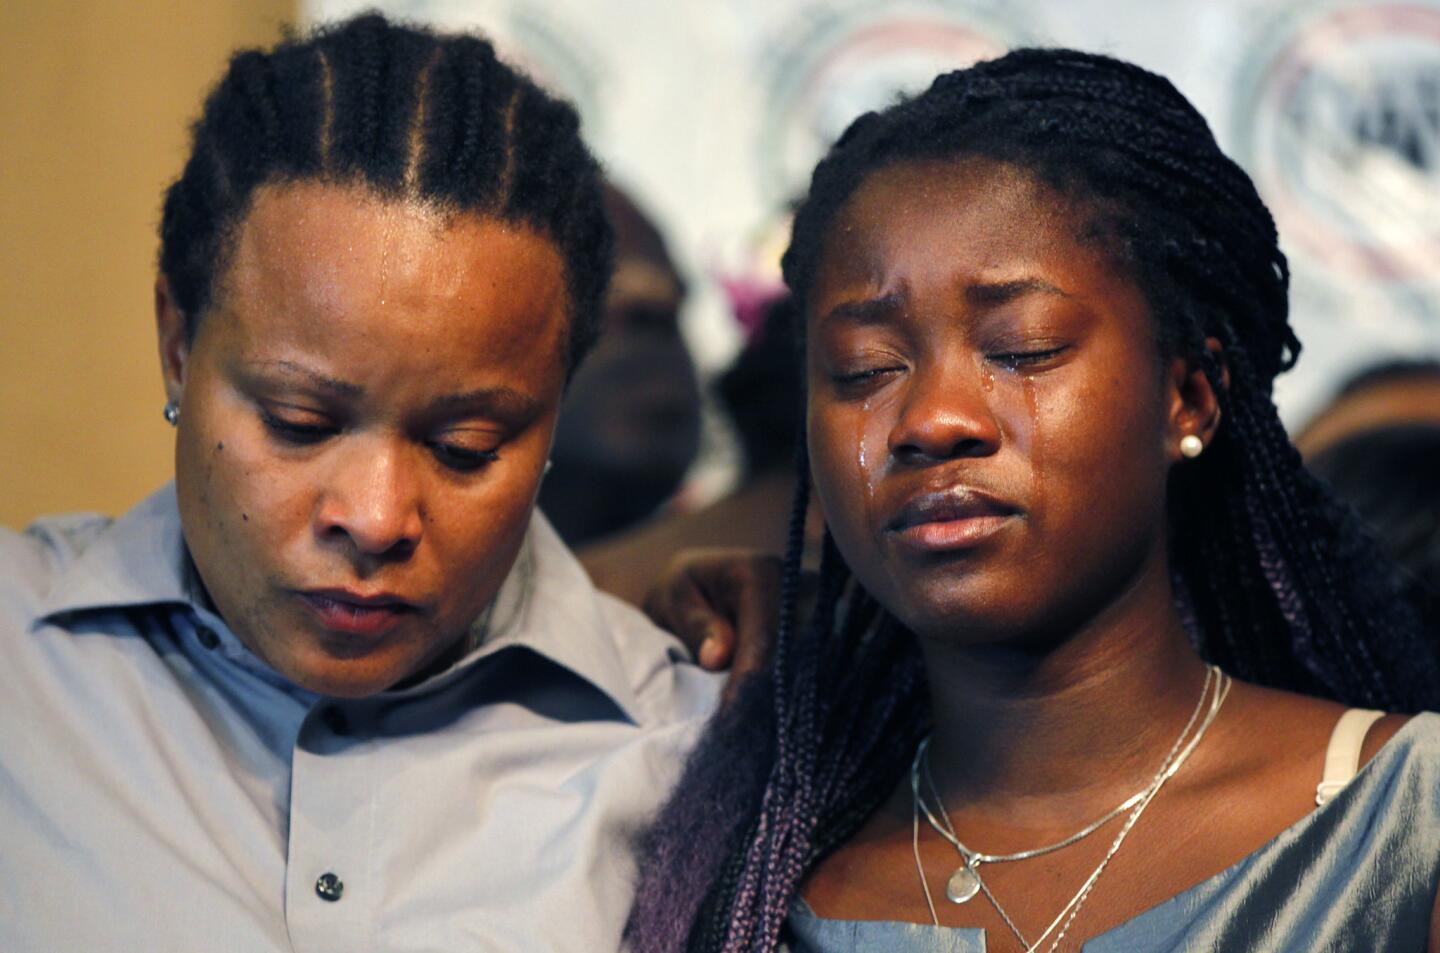 Taina Rozier, left, wife of victim Alfred Olango and daughter Charé Rozier listen during a news conference about the shooting.